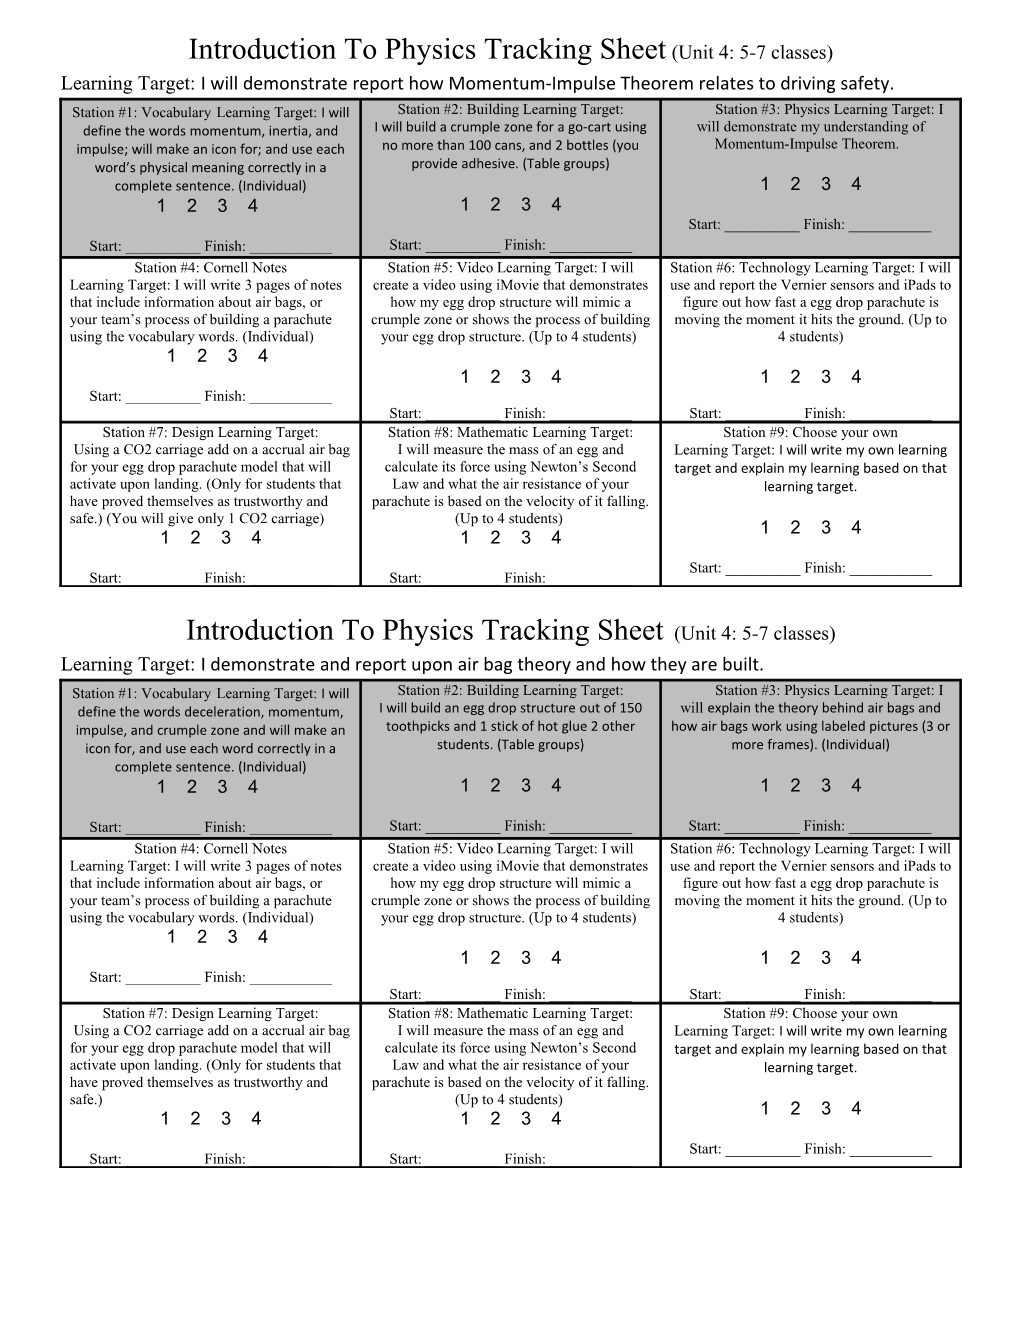 Introduction to Physics Tracking Sheet (Unit 4: 5-7 Classes)